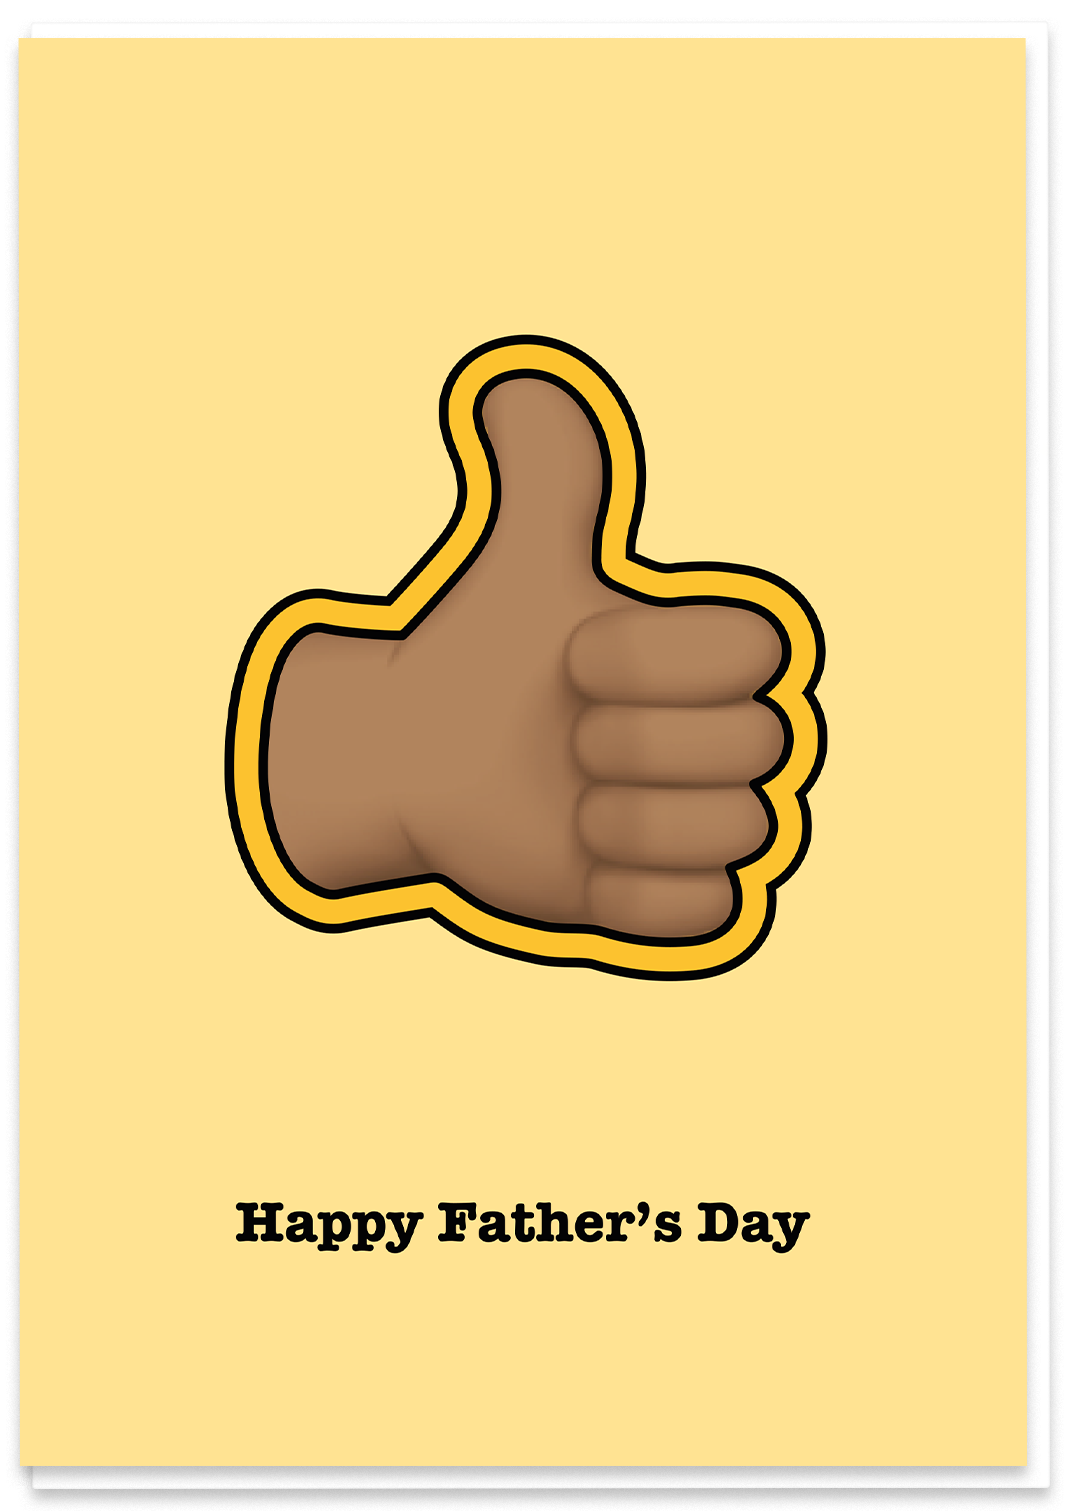 Father's Day Thumbs Up - Medium